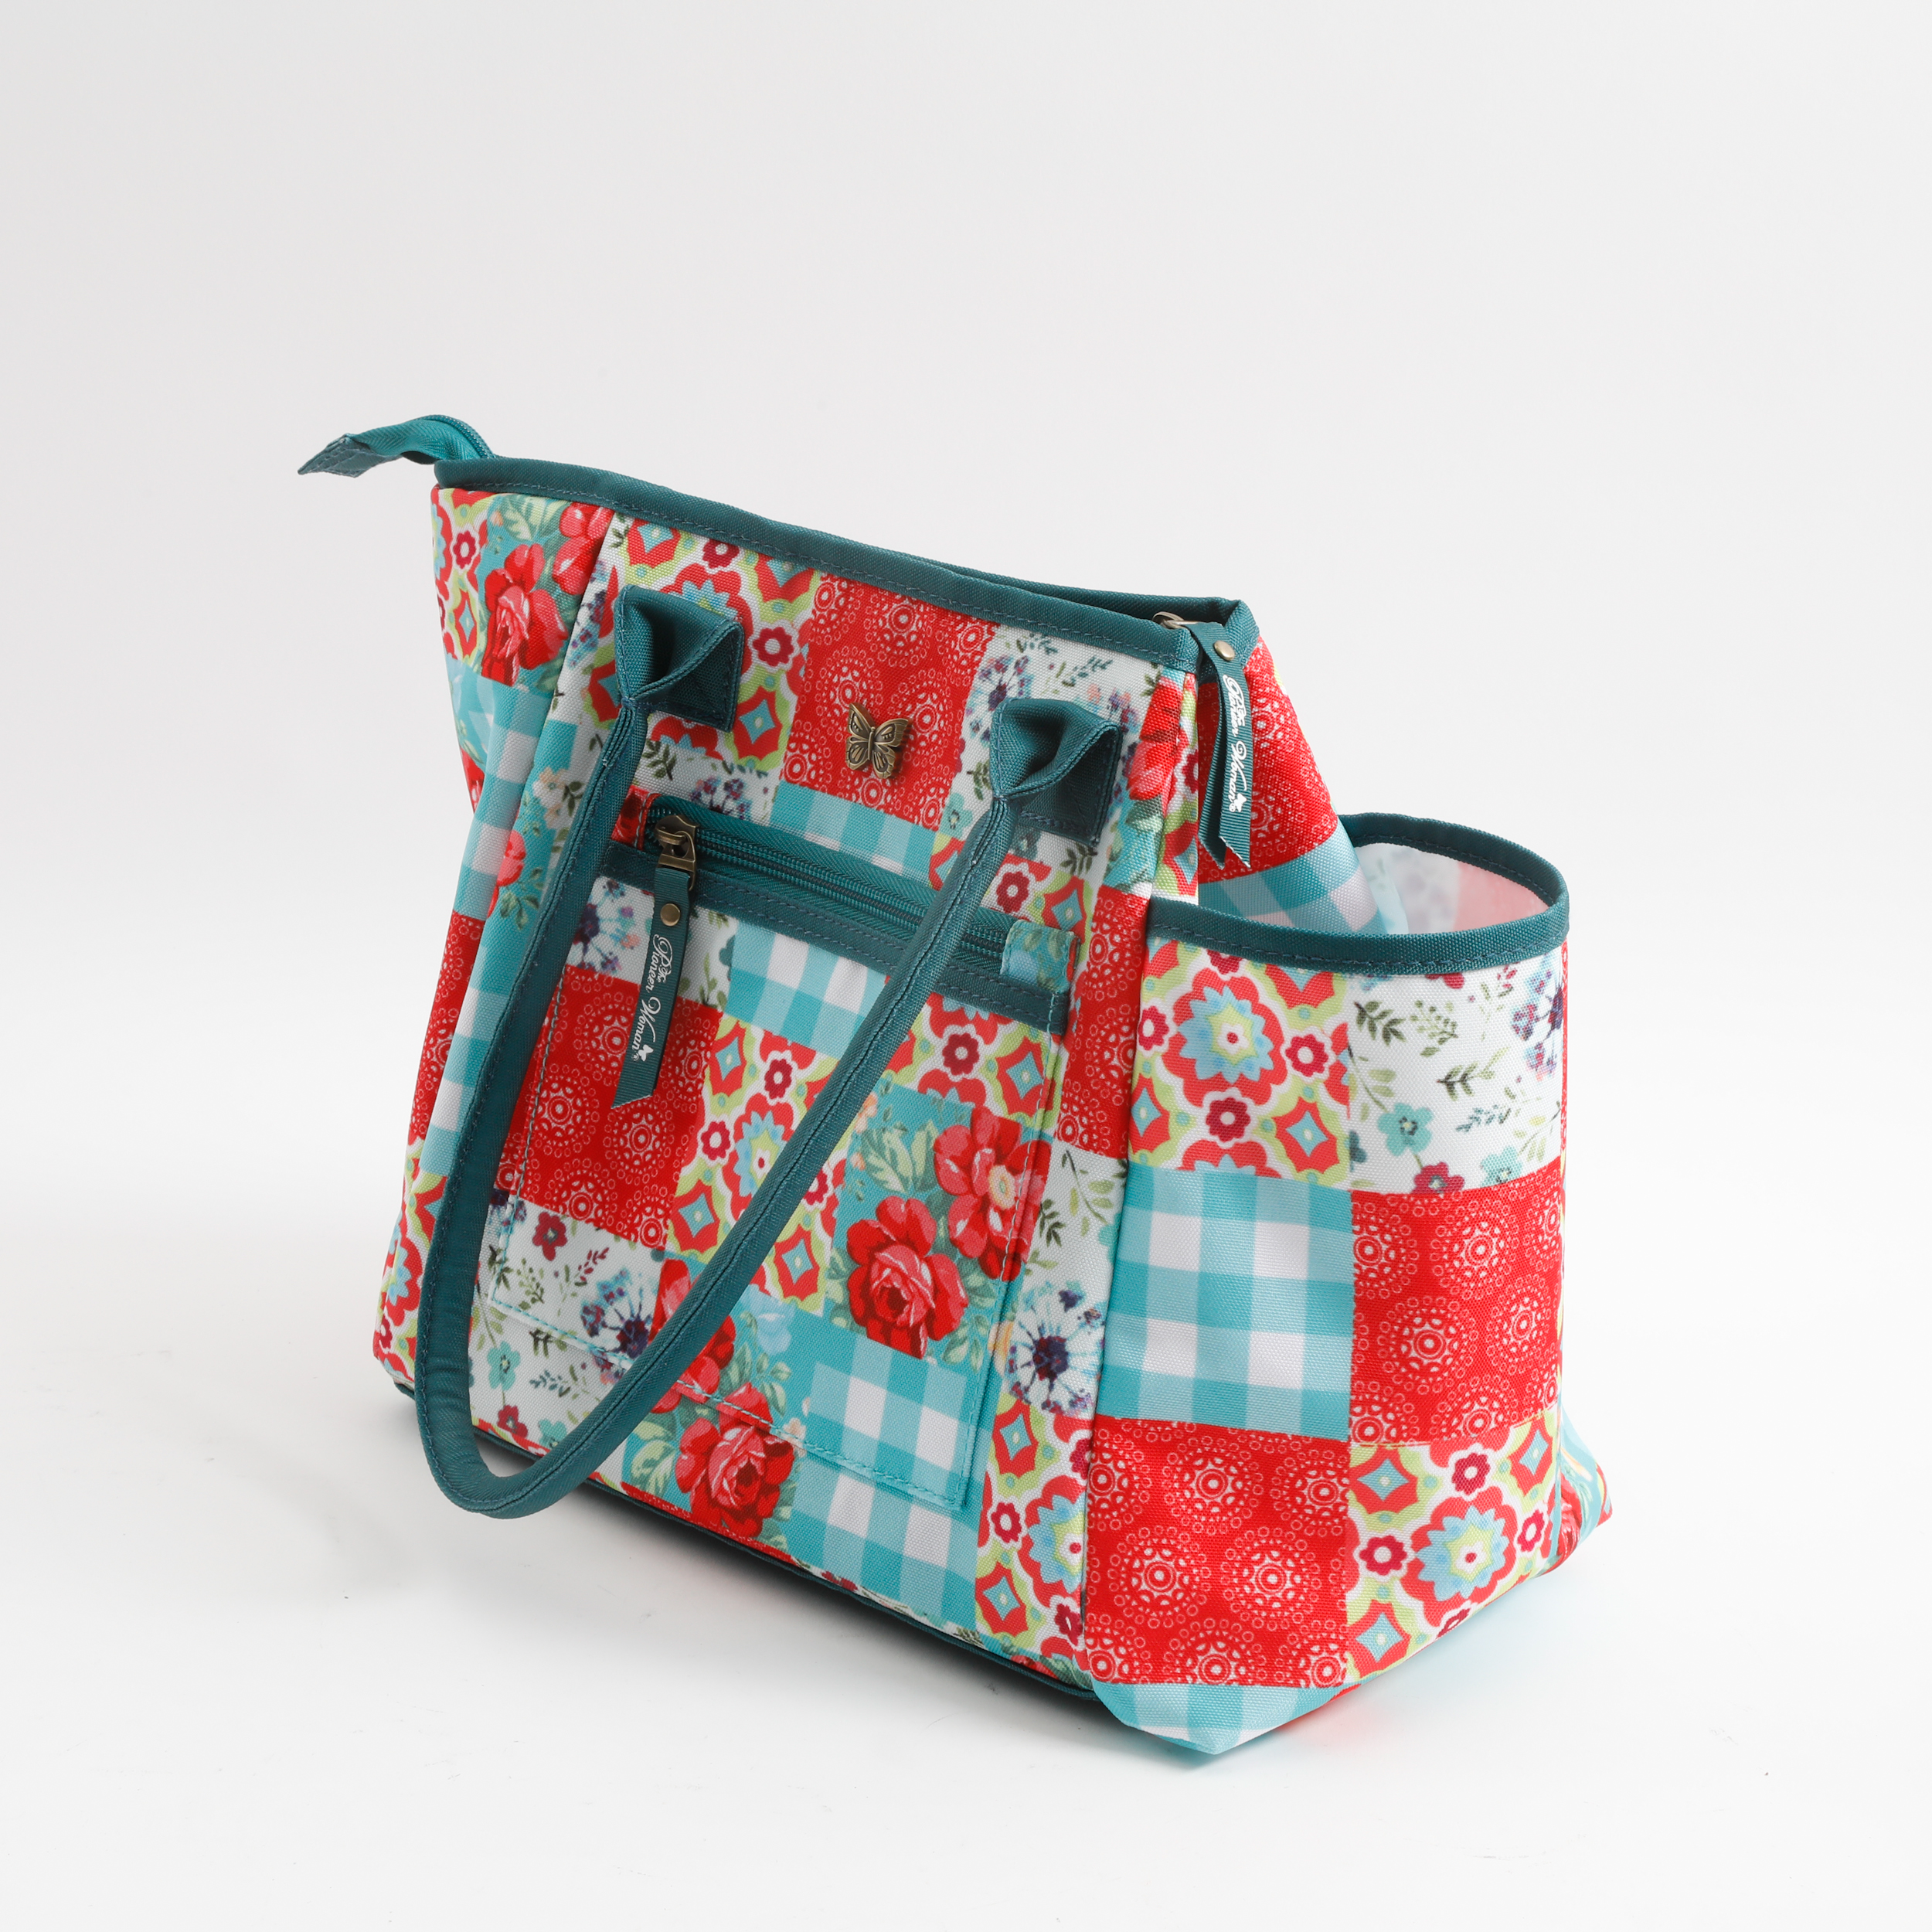 The Pioneer Woman Patchwork 4-Piece Lunch Combo Set - image 3 of 6